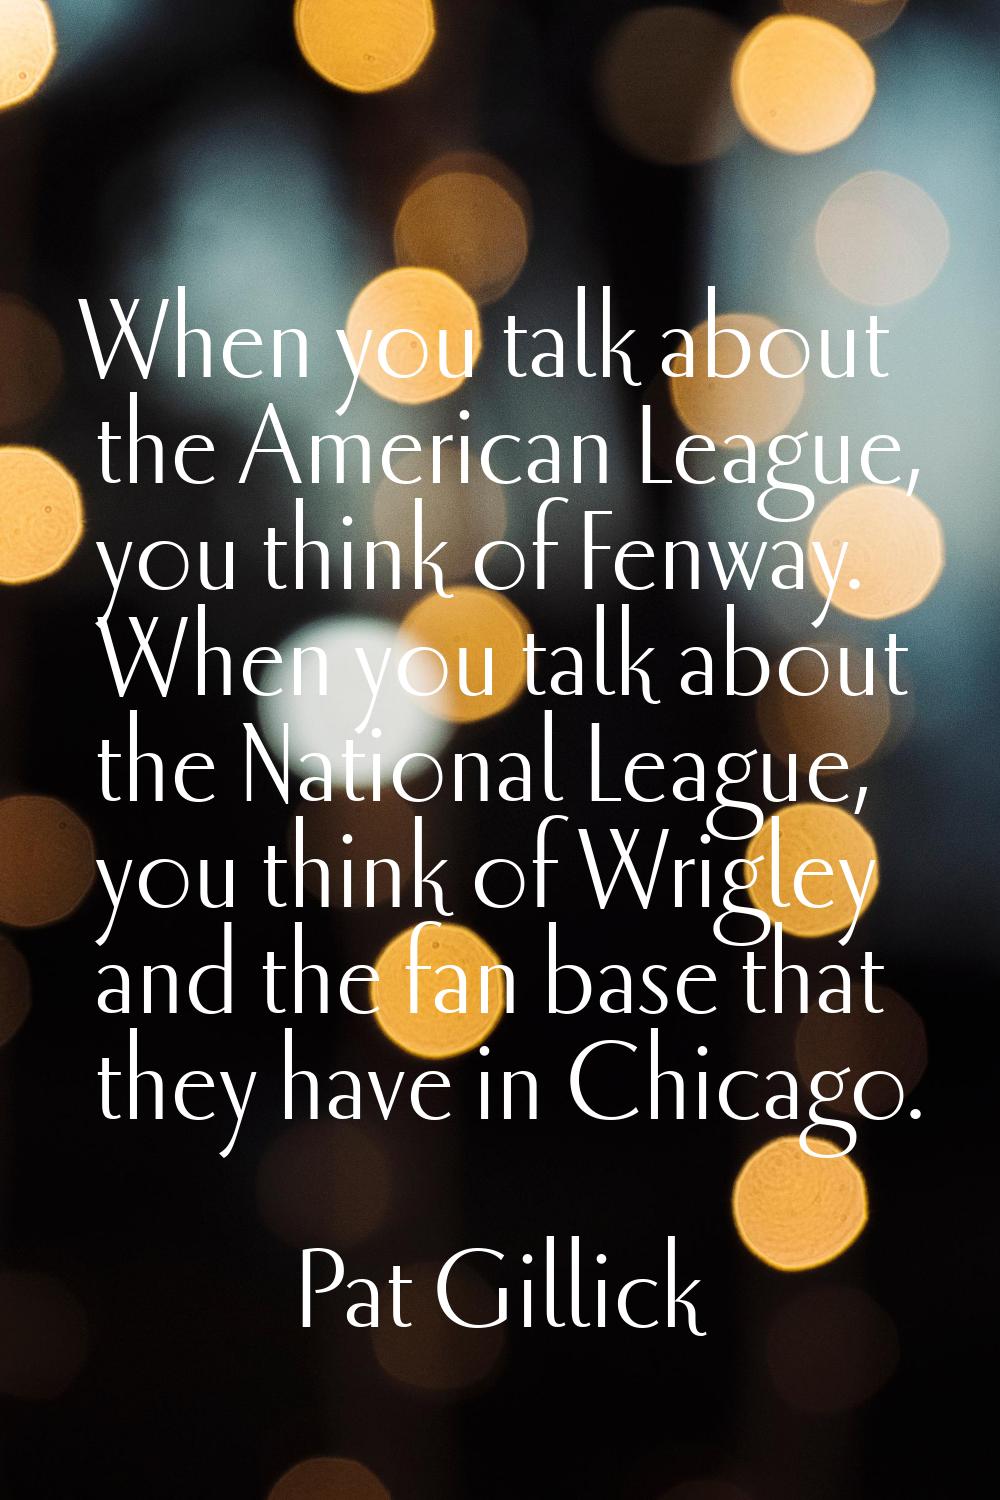 When you talk about the American League, you think of Fenway. When you talk about the National Leag